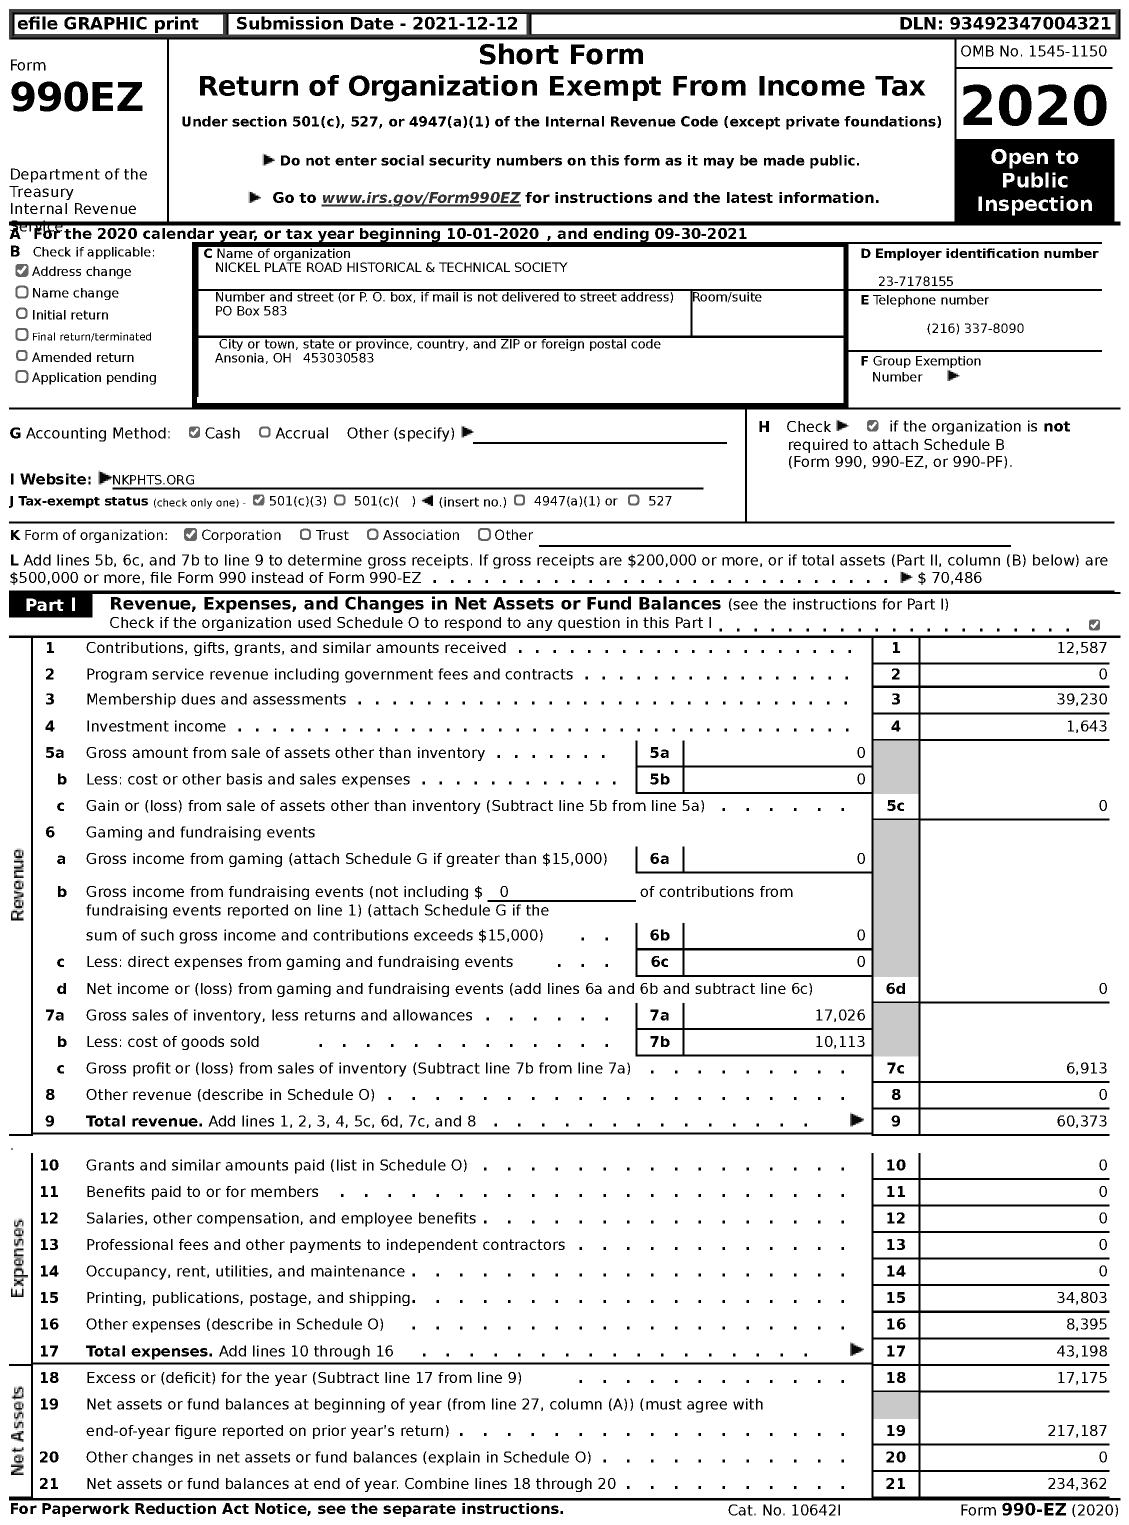 Image of first page of 2020 Form 990EZ for NICKEL PLATe Road HISTORICAL